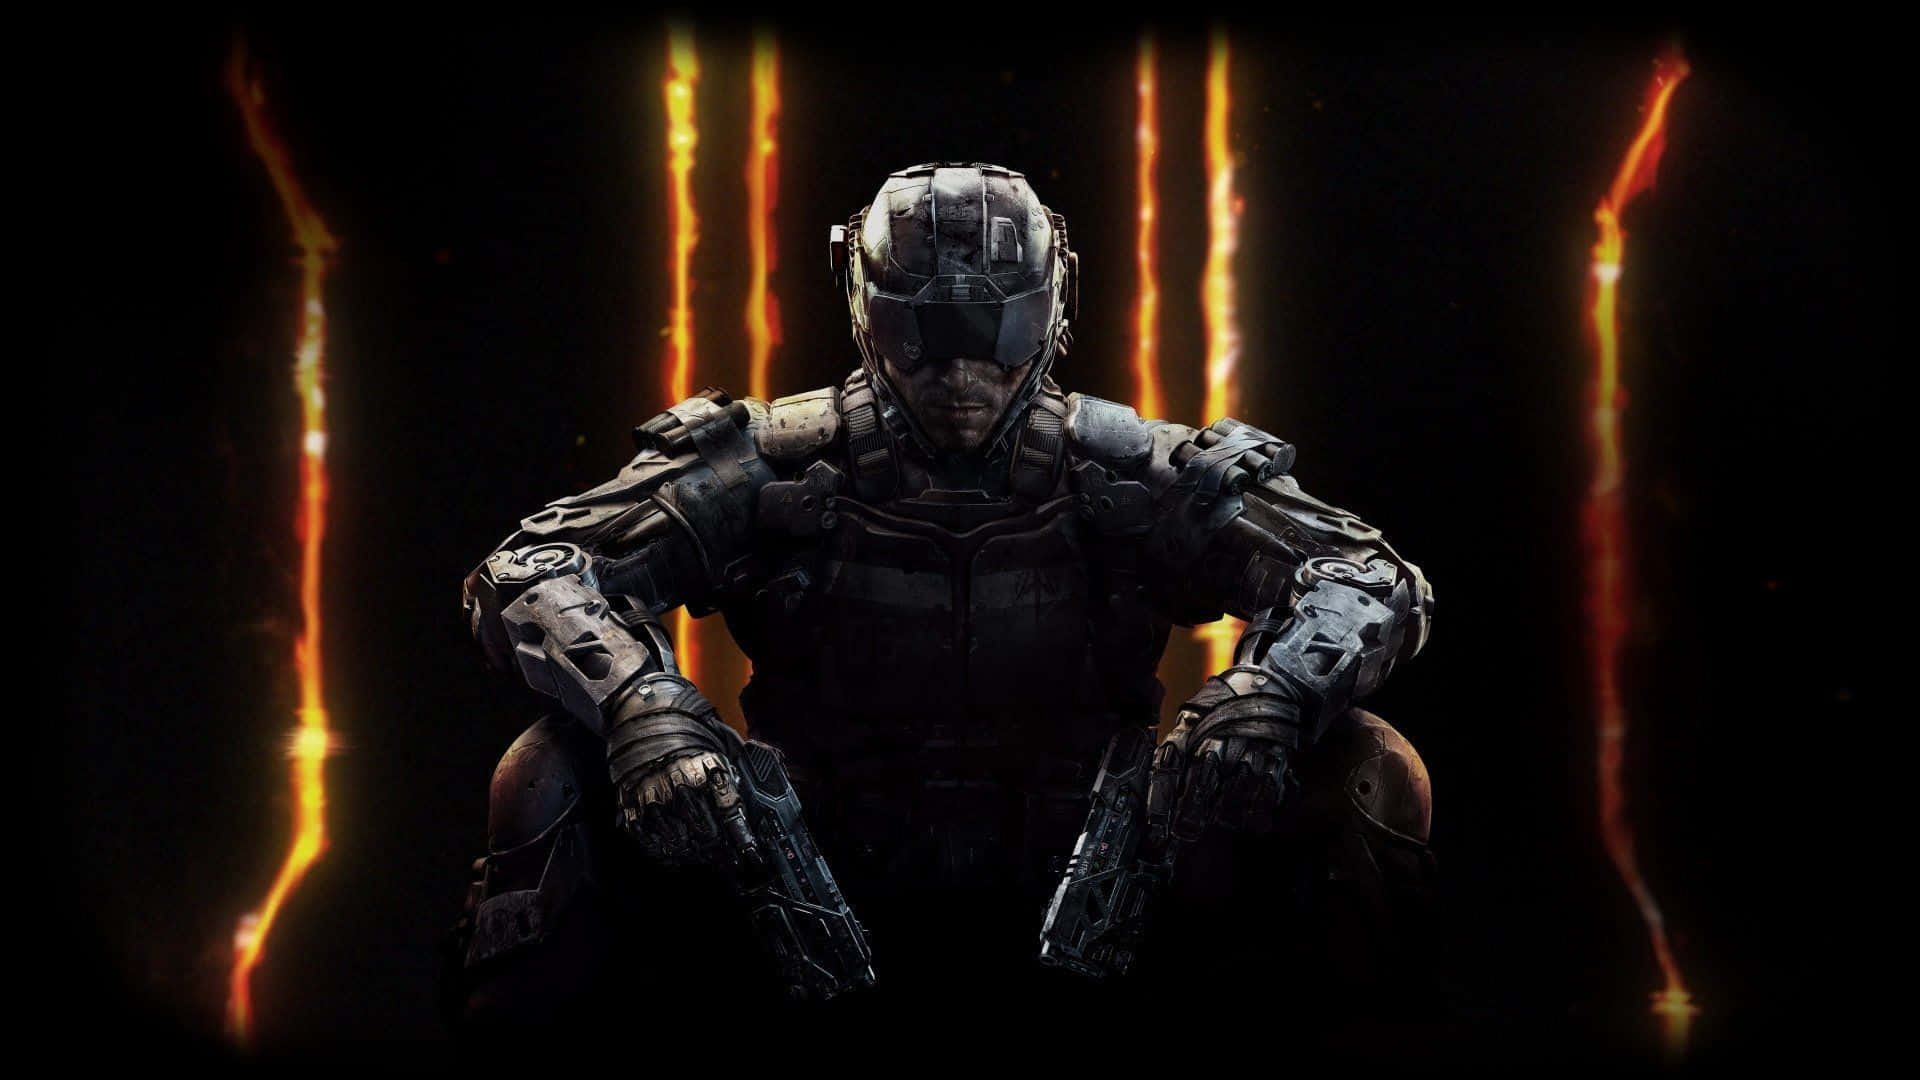 Face off against your enemies in Call of Duty Black Ops. Wallpaper